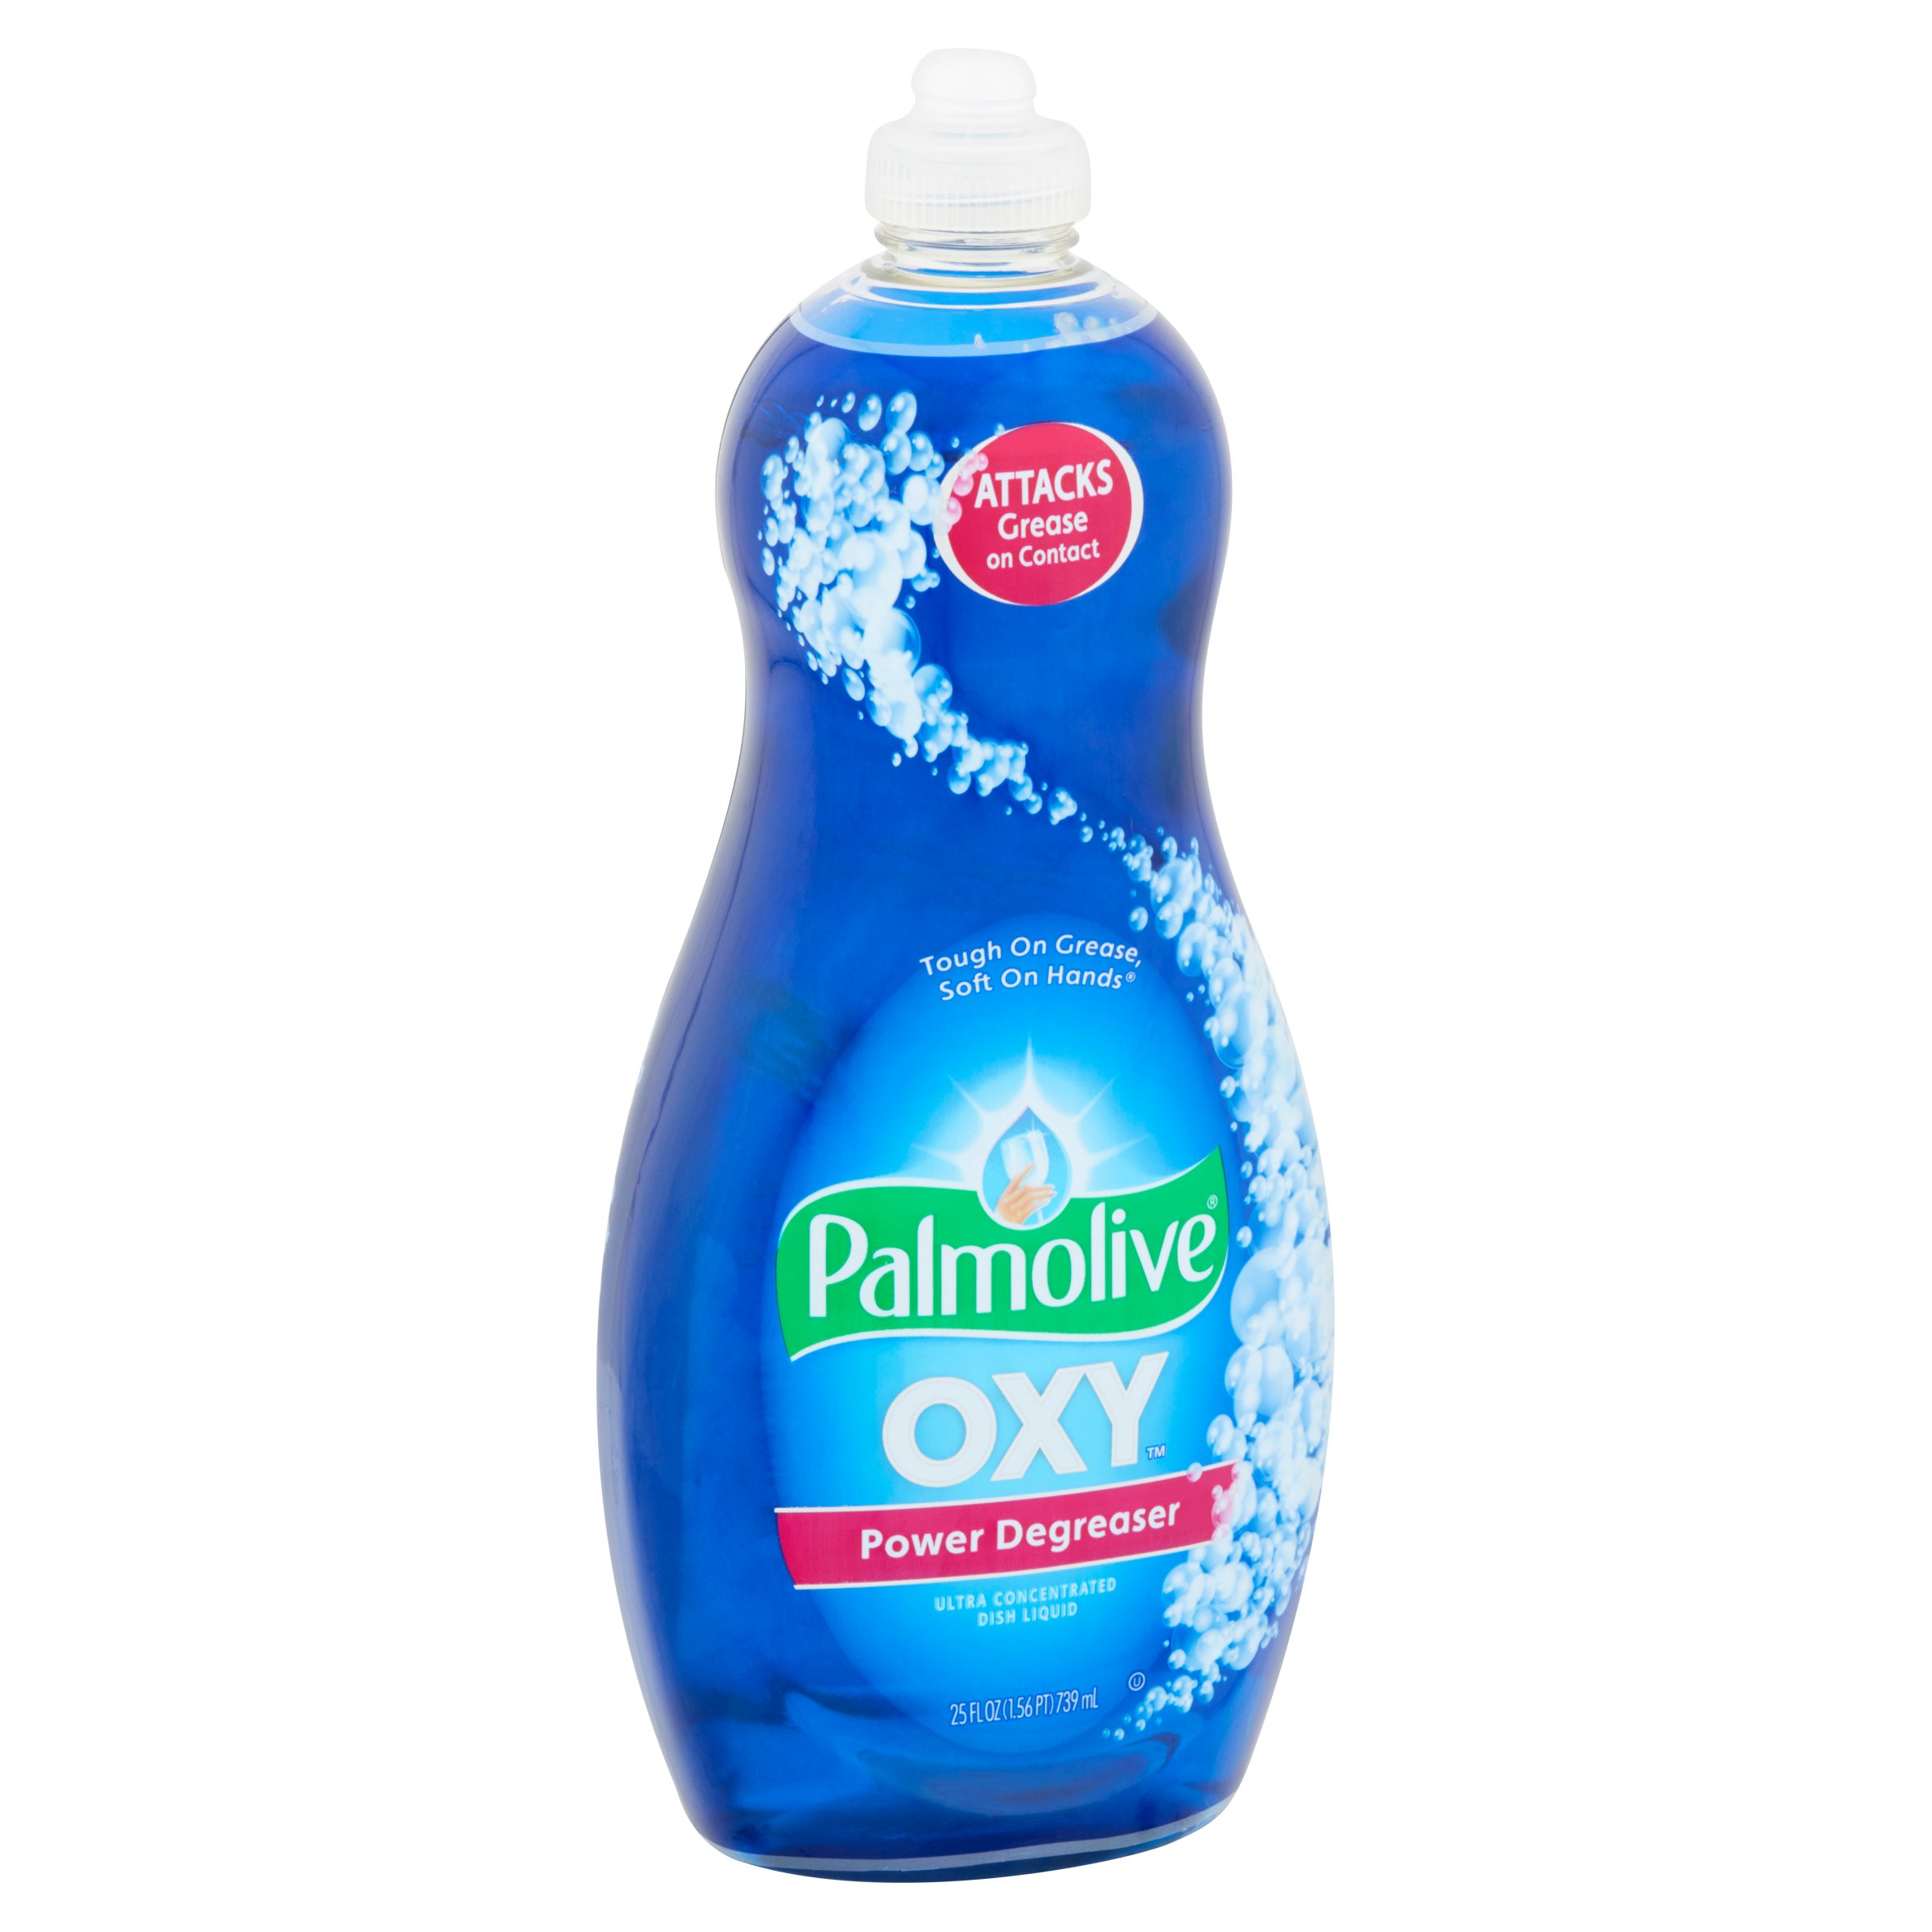 Palmolive Oxy Power Degreaser Ultra Concentrated Dish Liquid, 25 fl oz - image 3 of 6